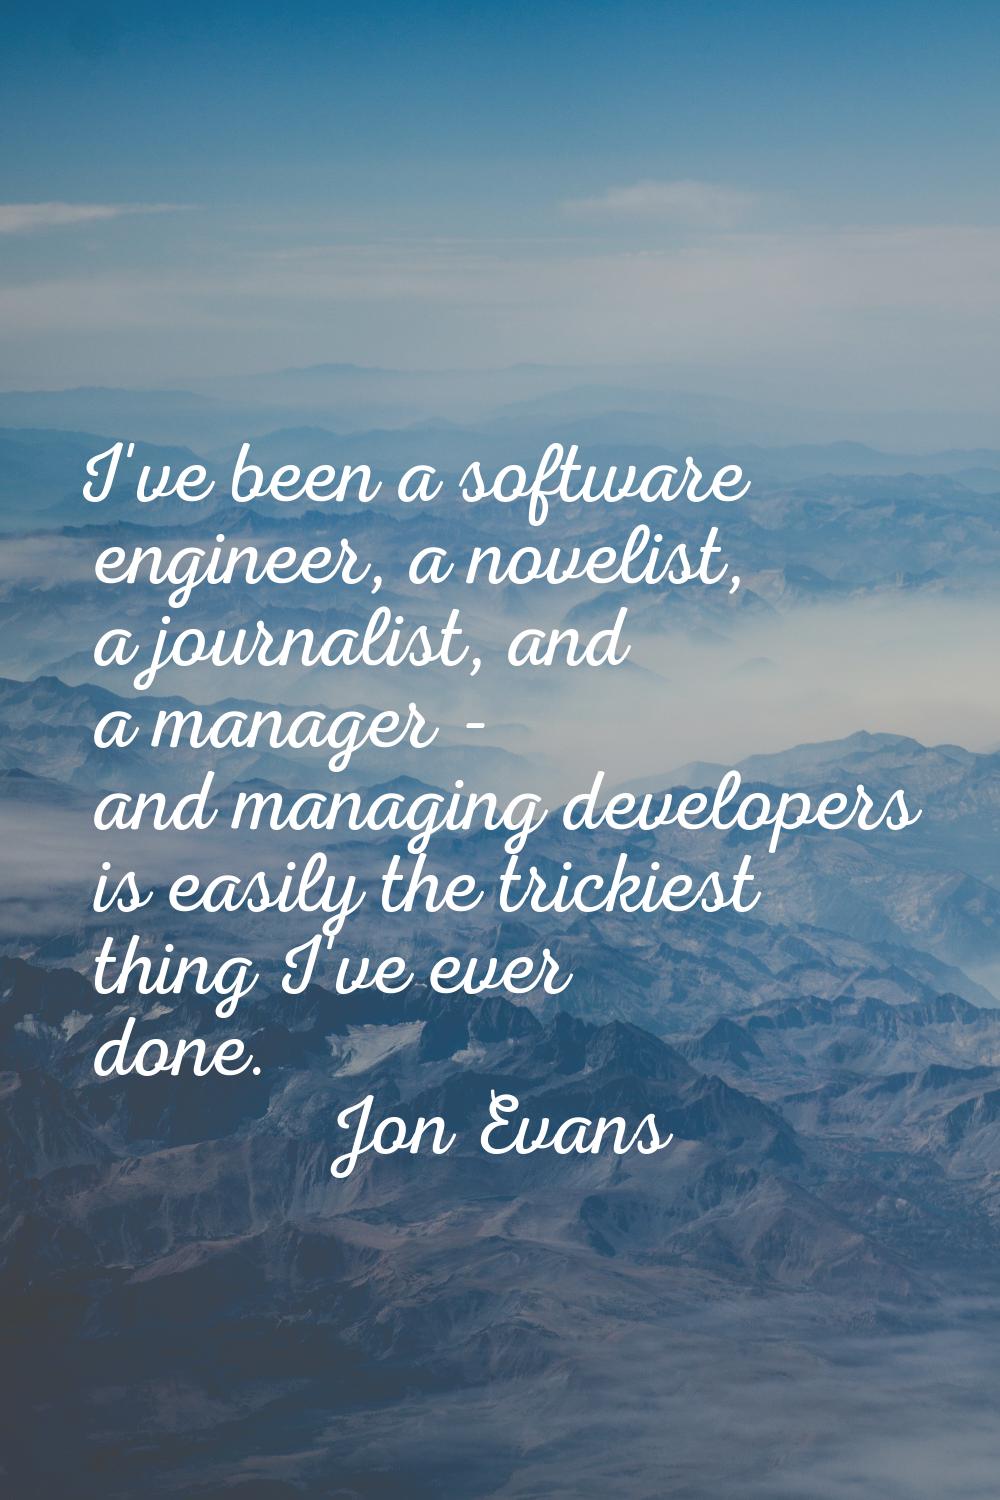 I've been a software engineer, a novelist, a journalist, and a manager - and managing developers is